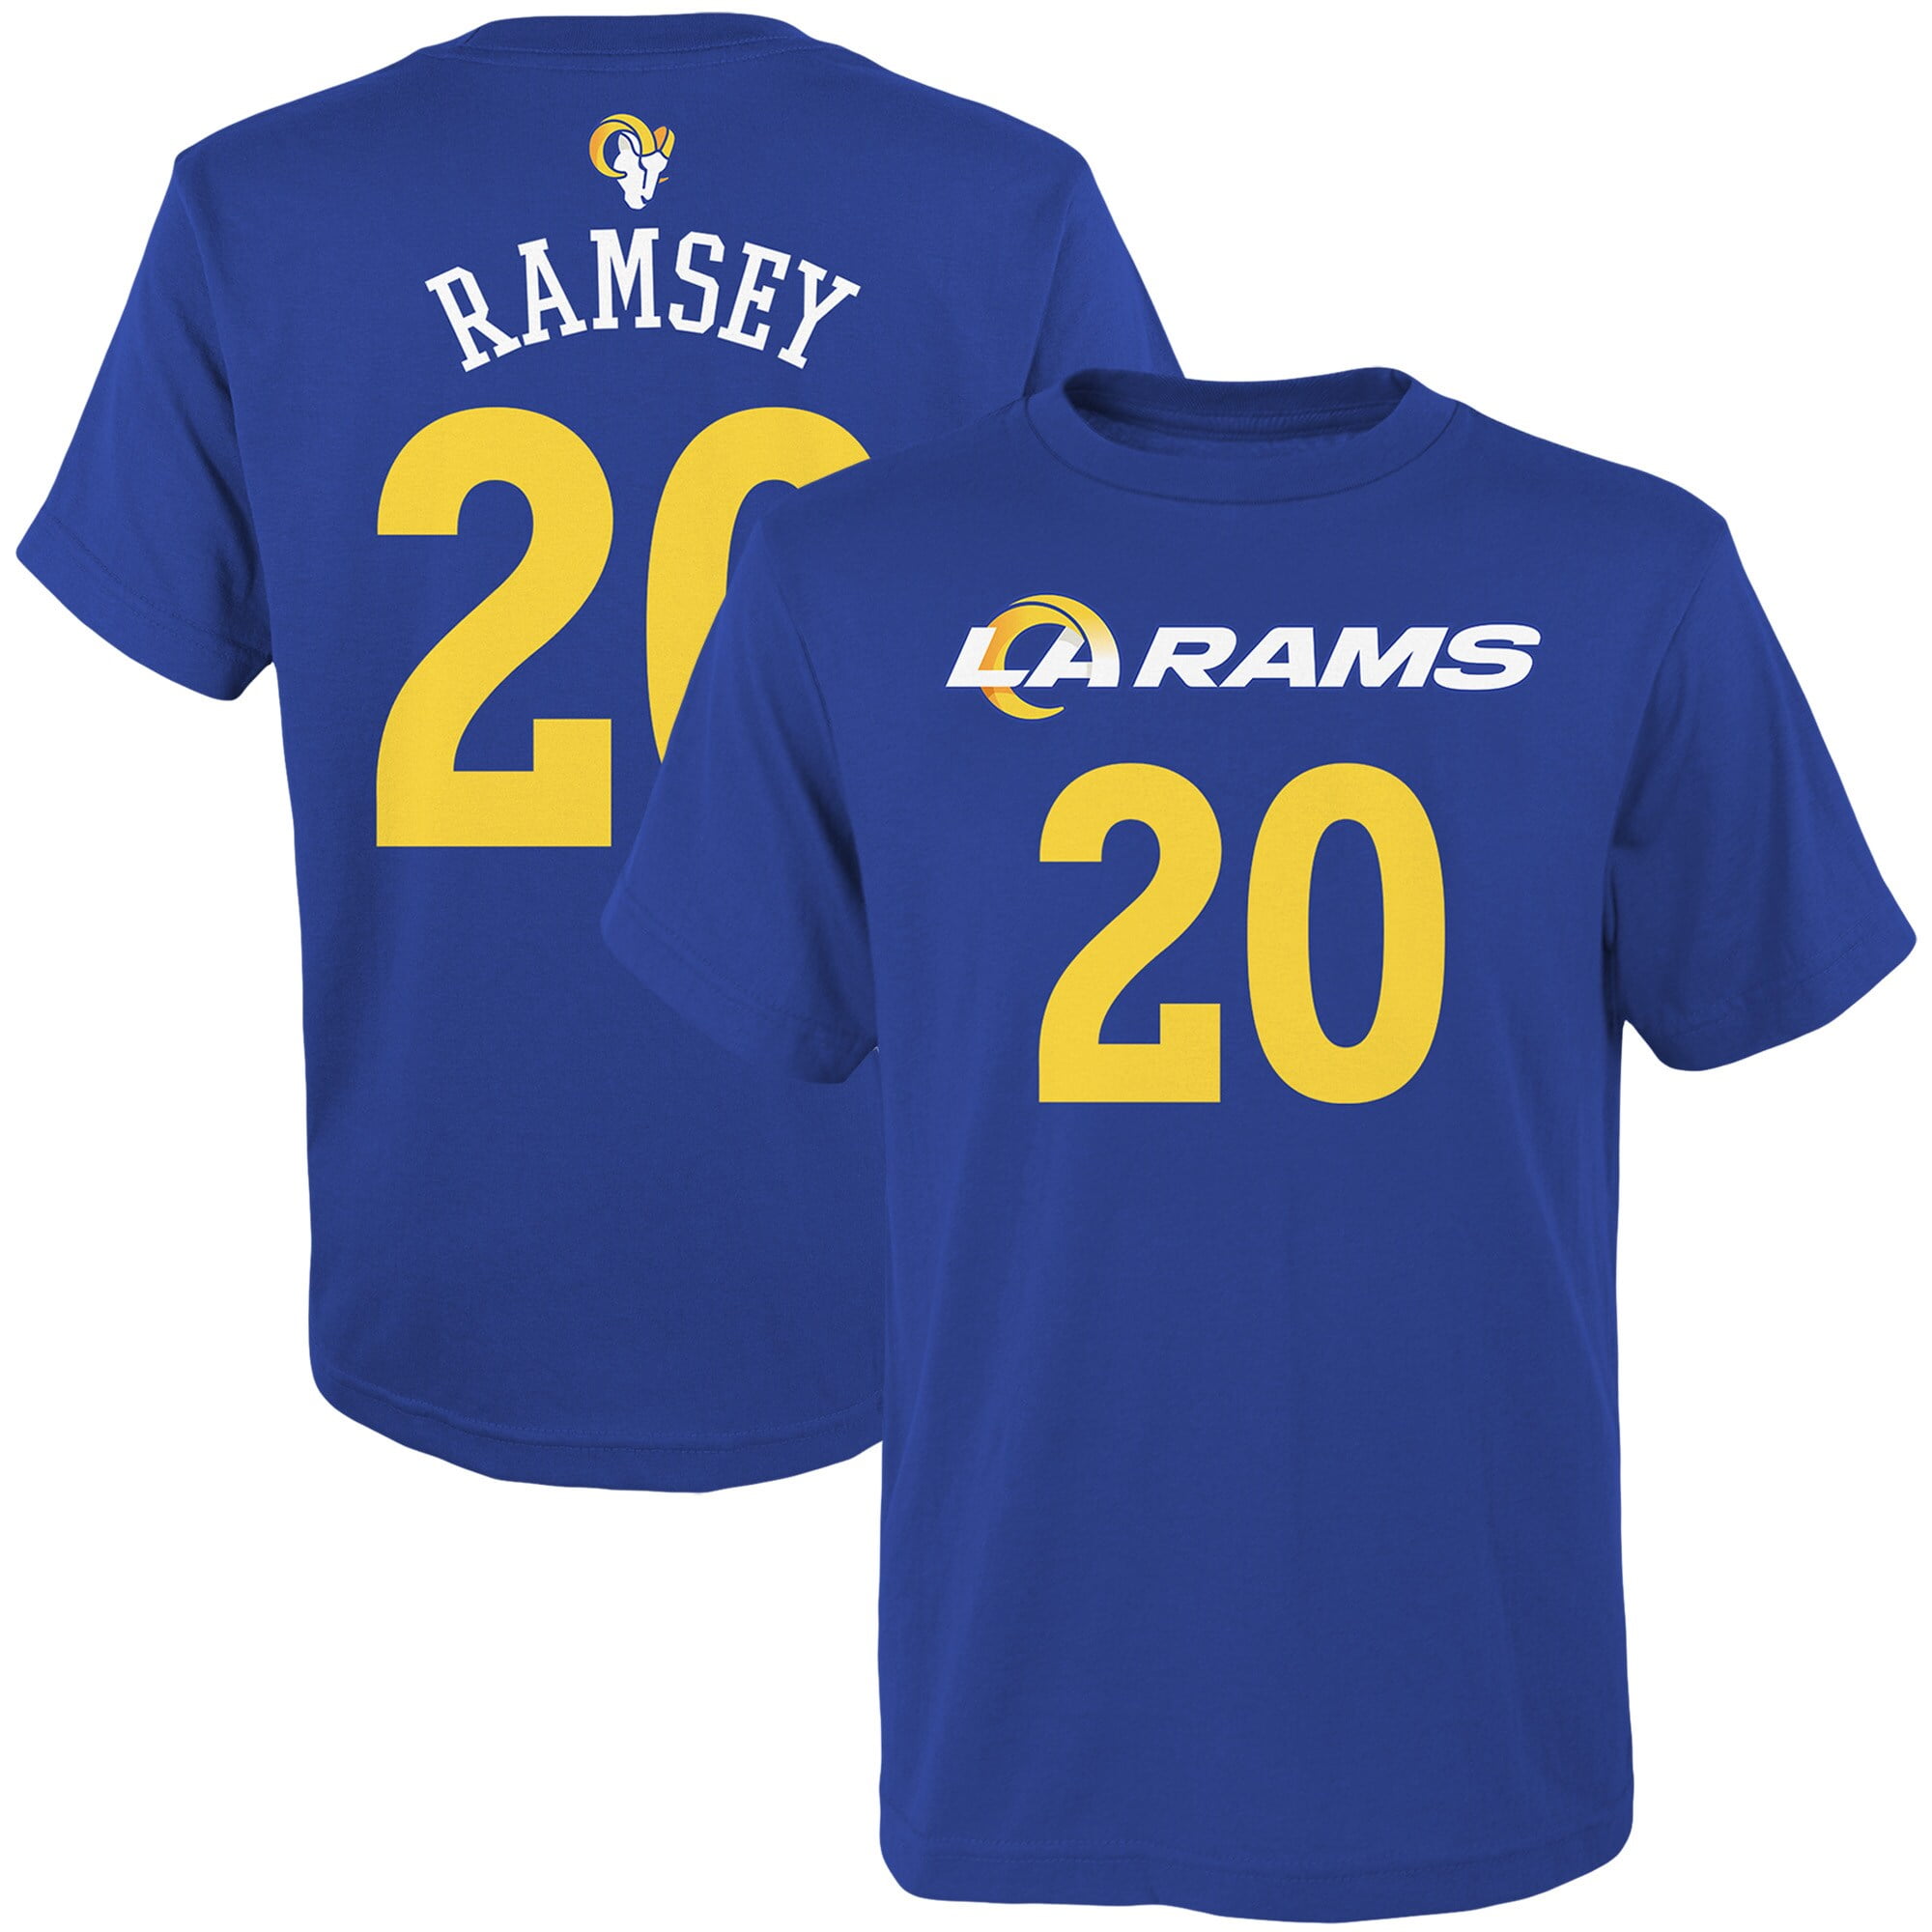 ramsey jersey number